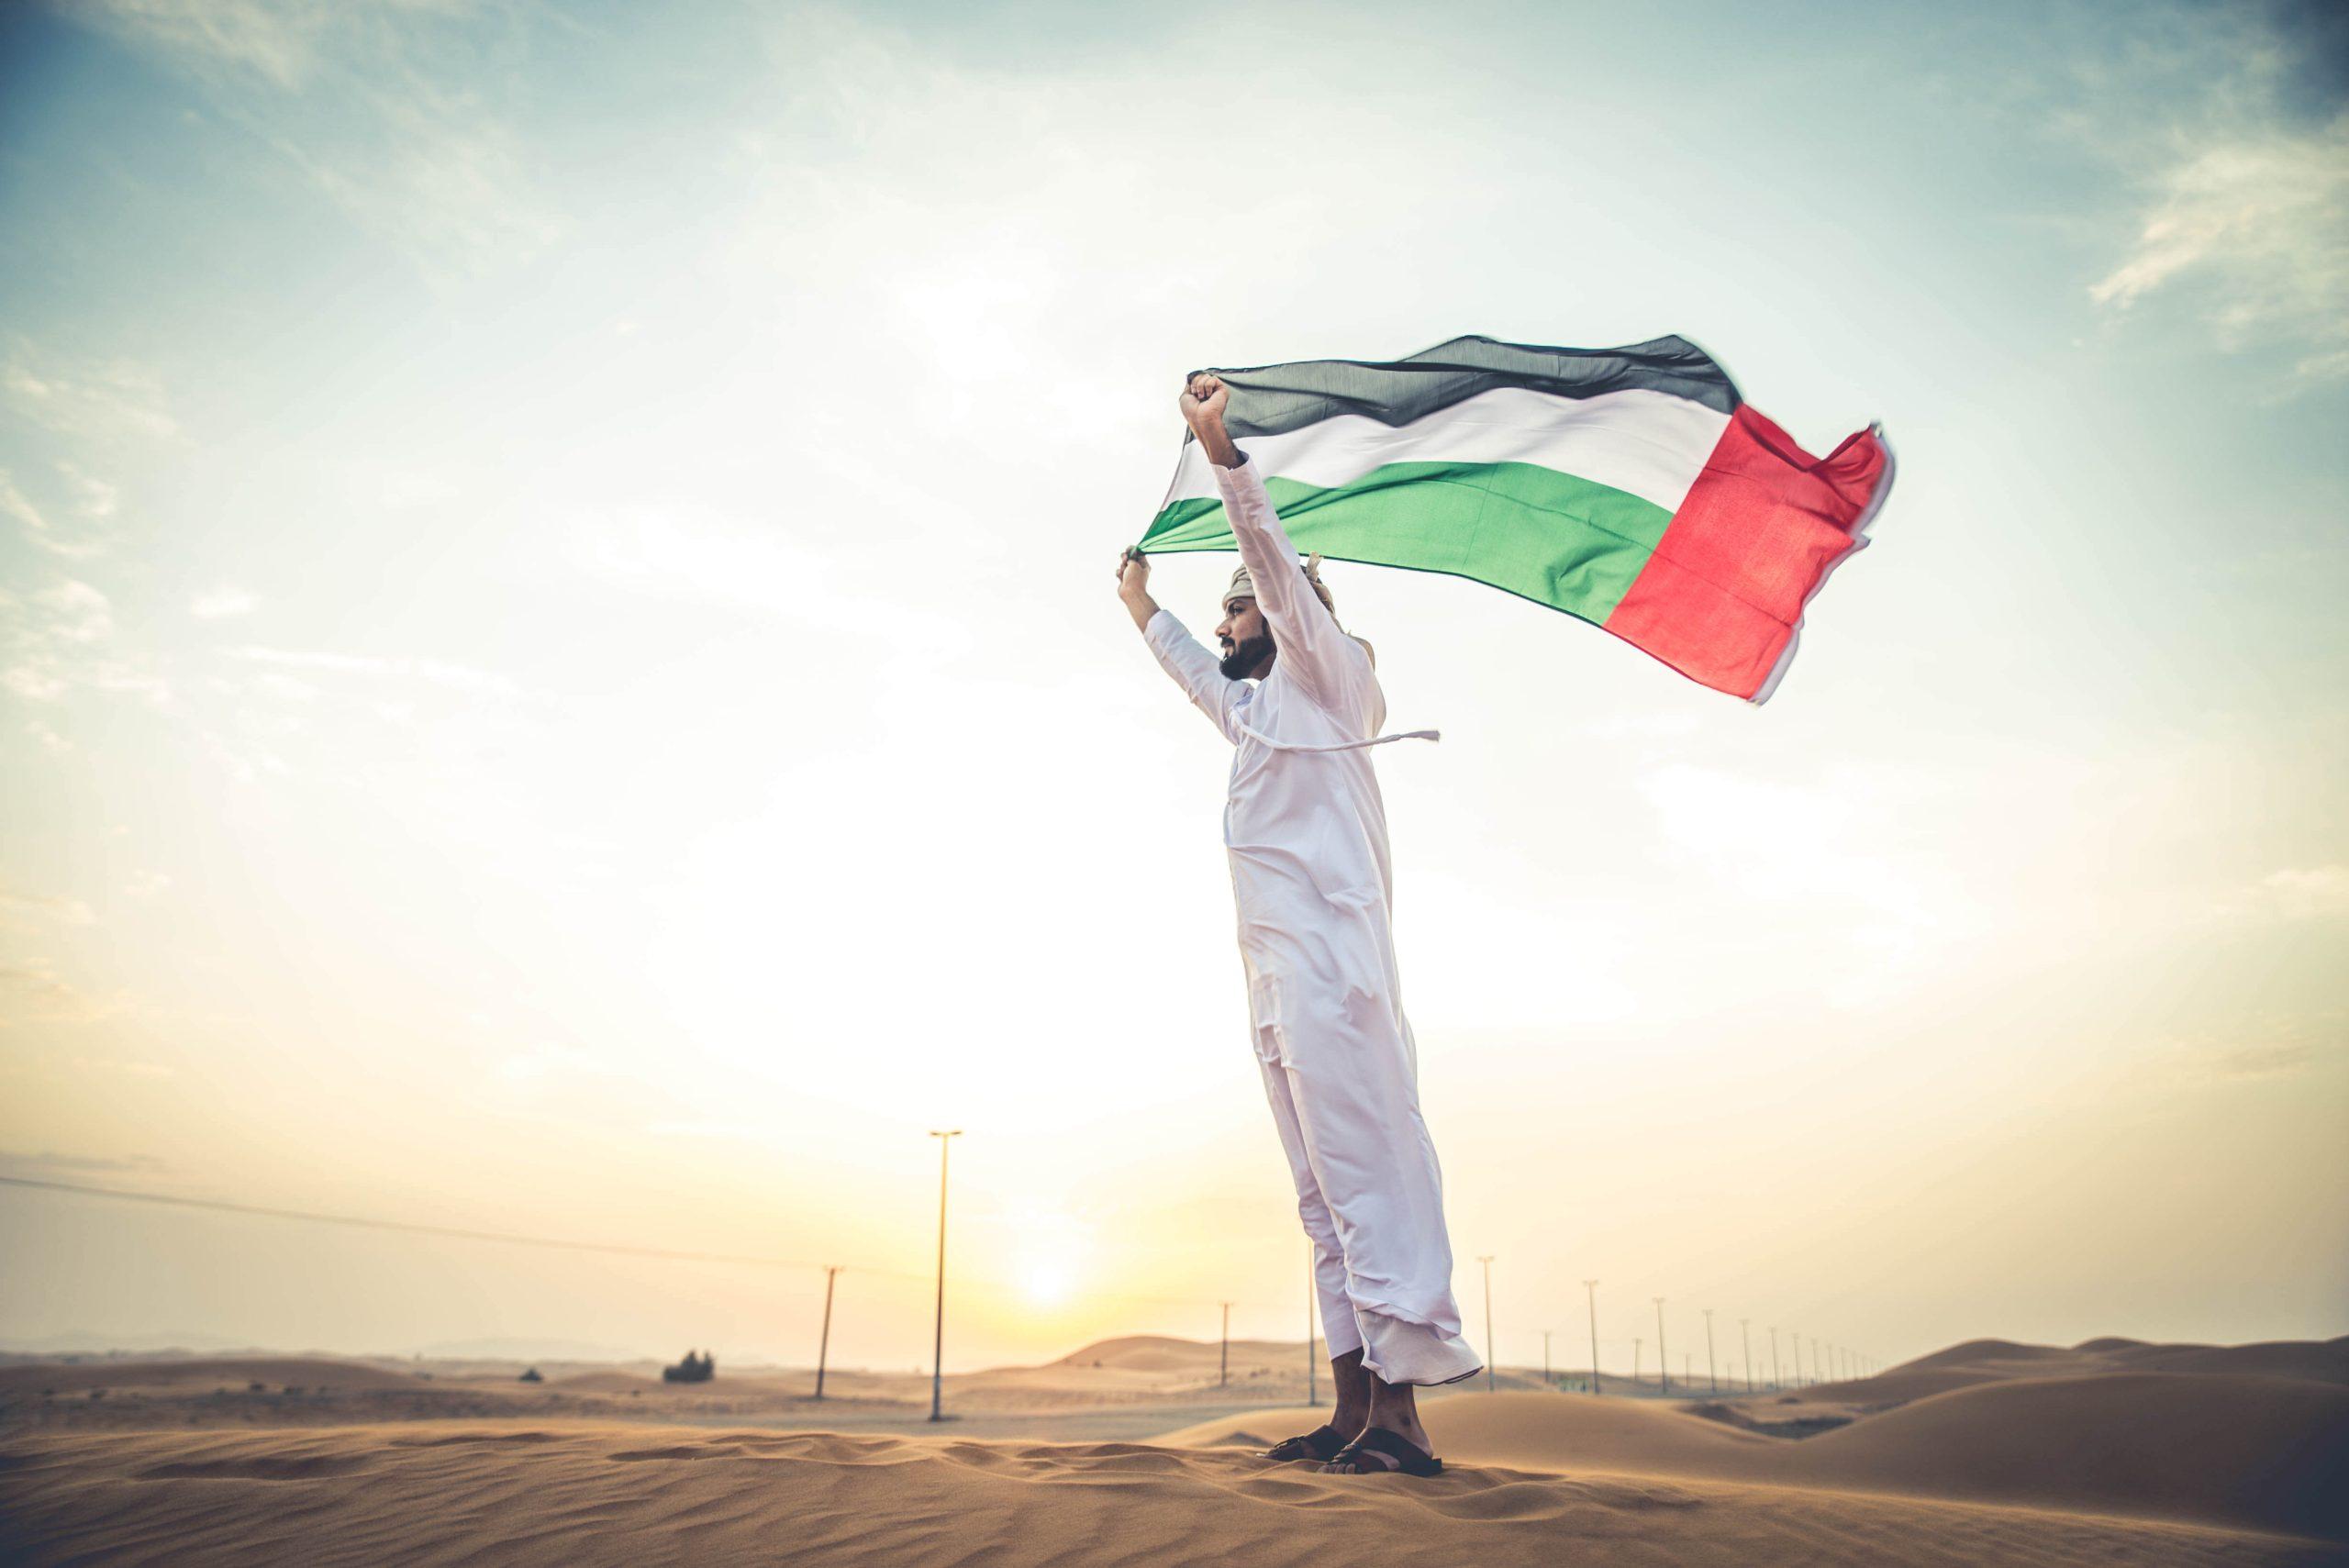 Doing Business in the United Arab Emirates